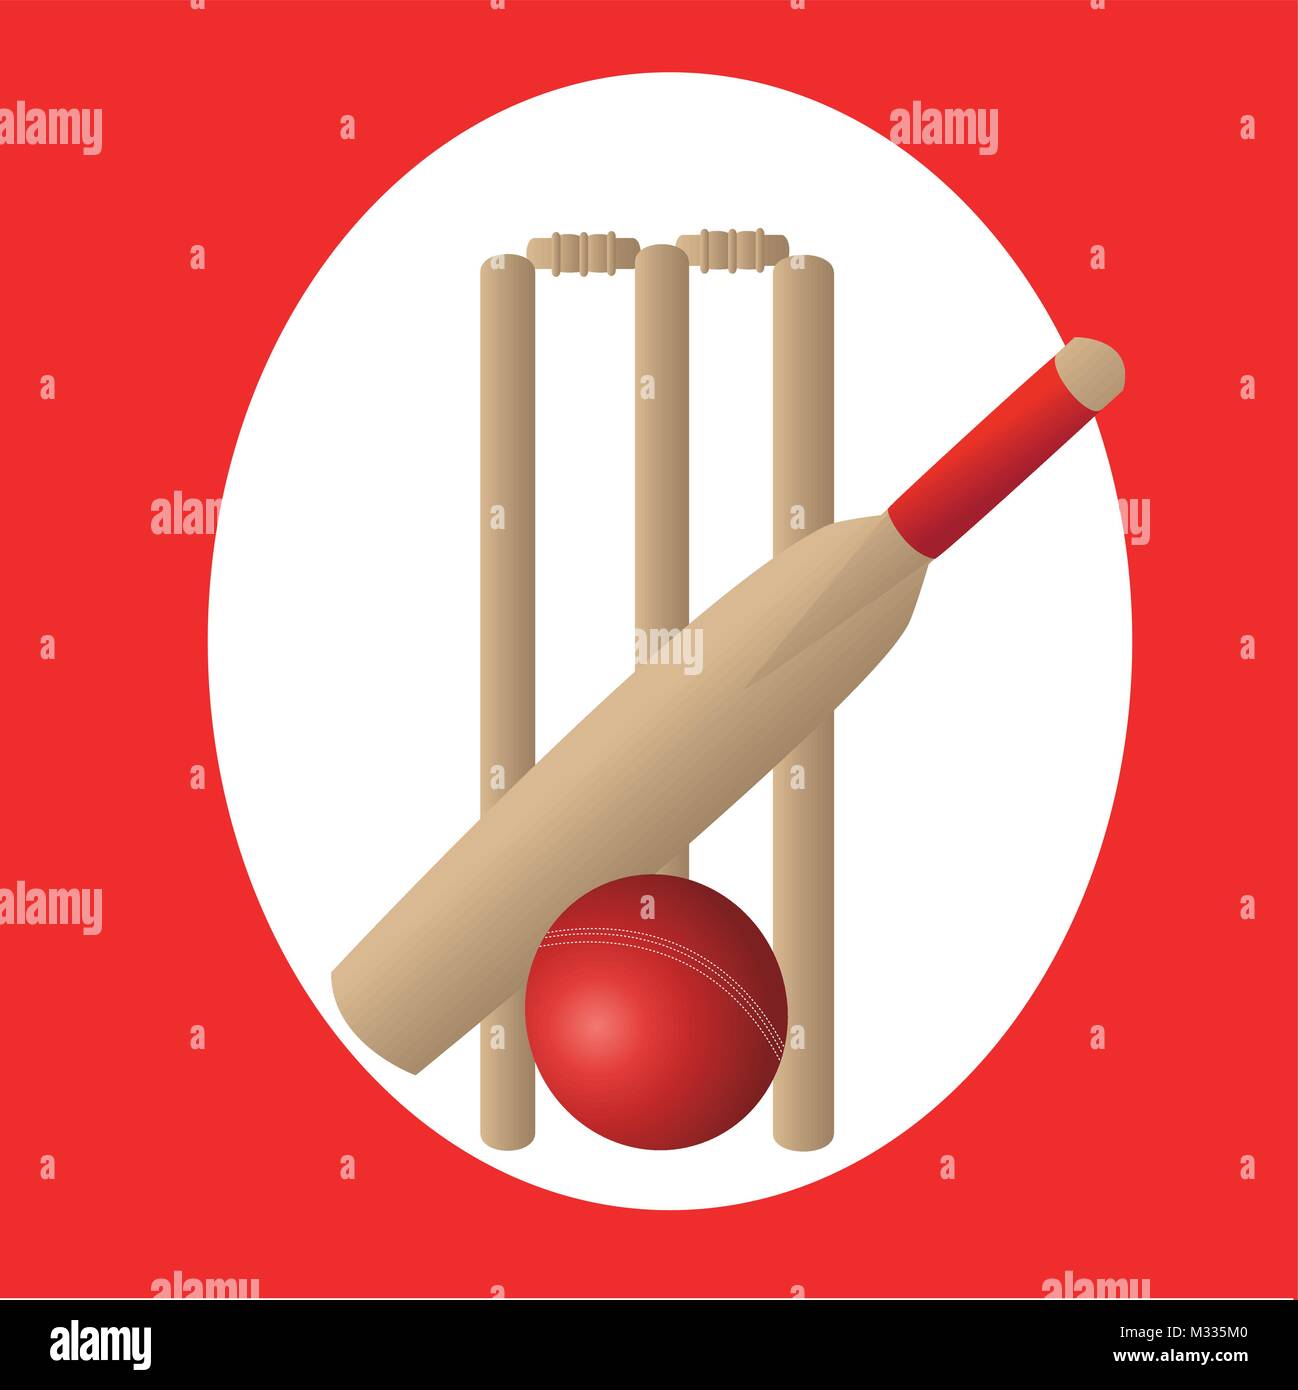 cricket set with bat ball and wickets and red oval background Stock Vector